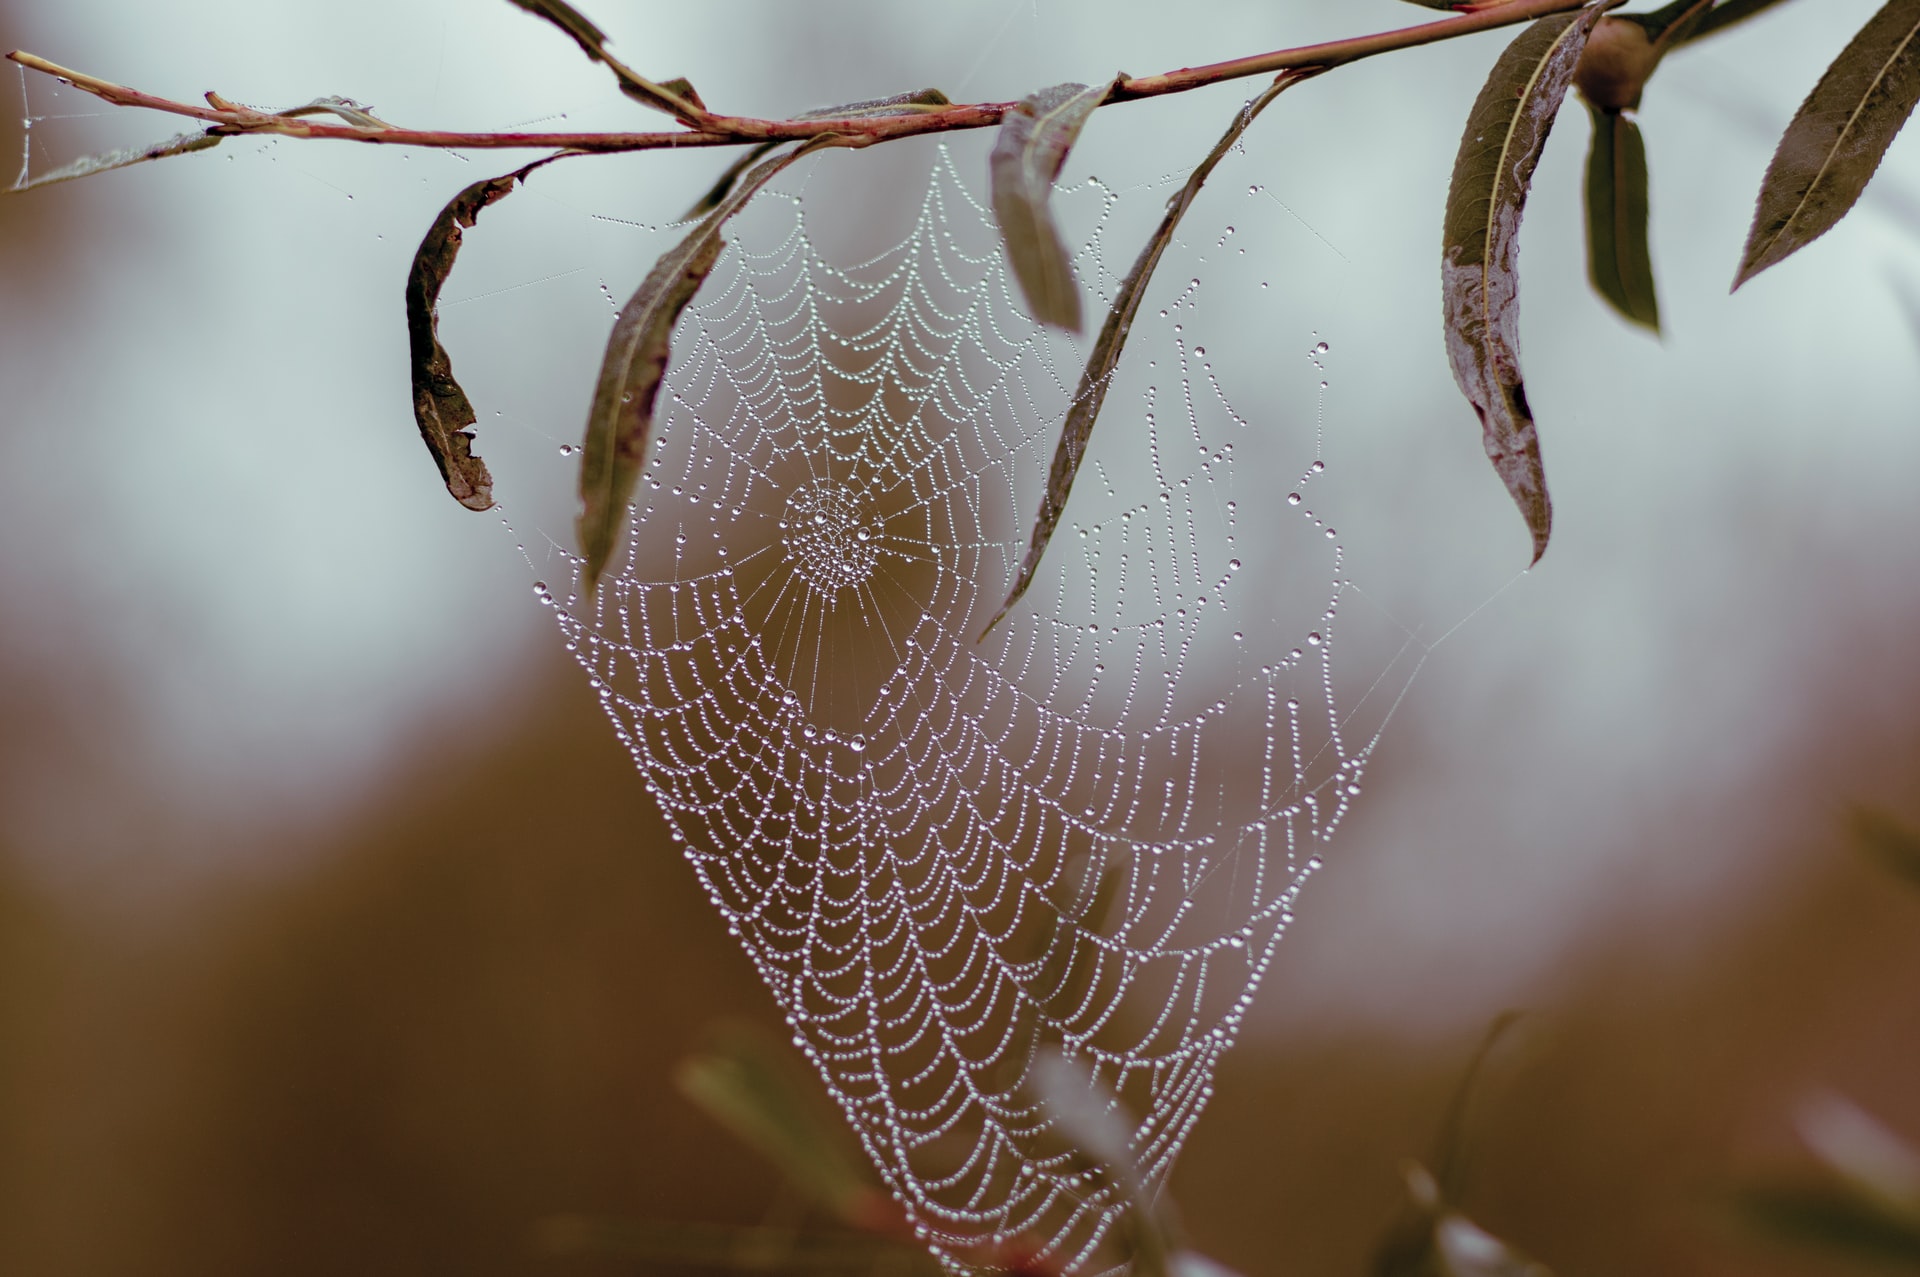 Photo of a dew-covered spider web stretched over an olive or eucalyptus twig